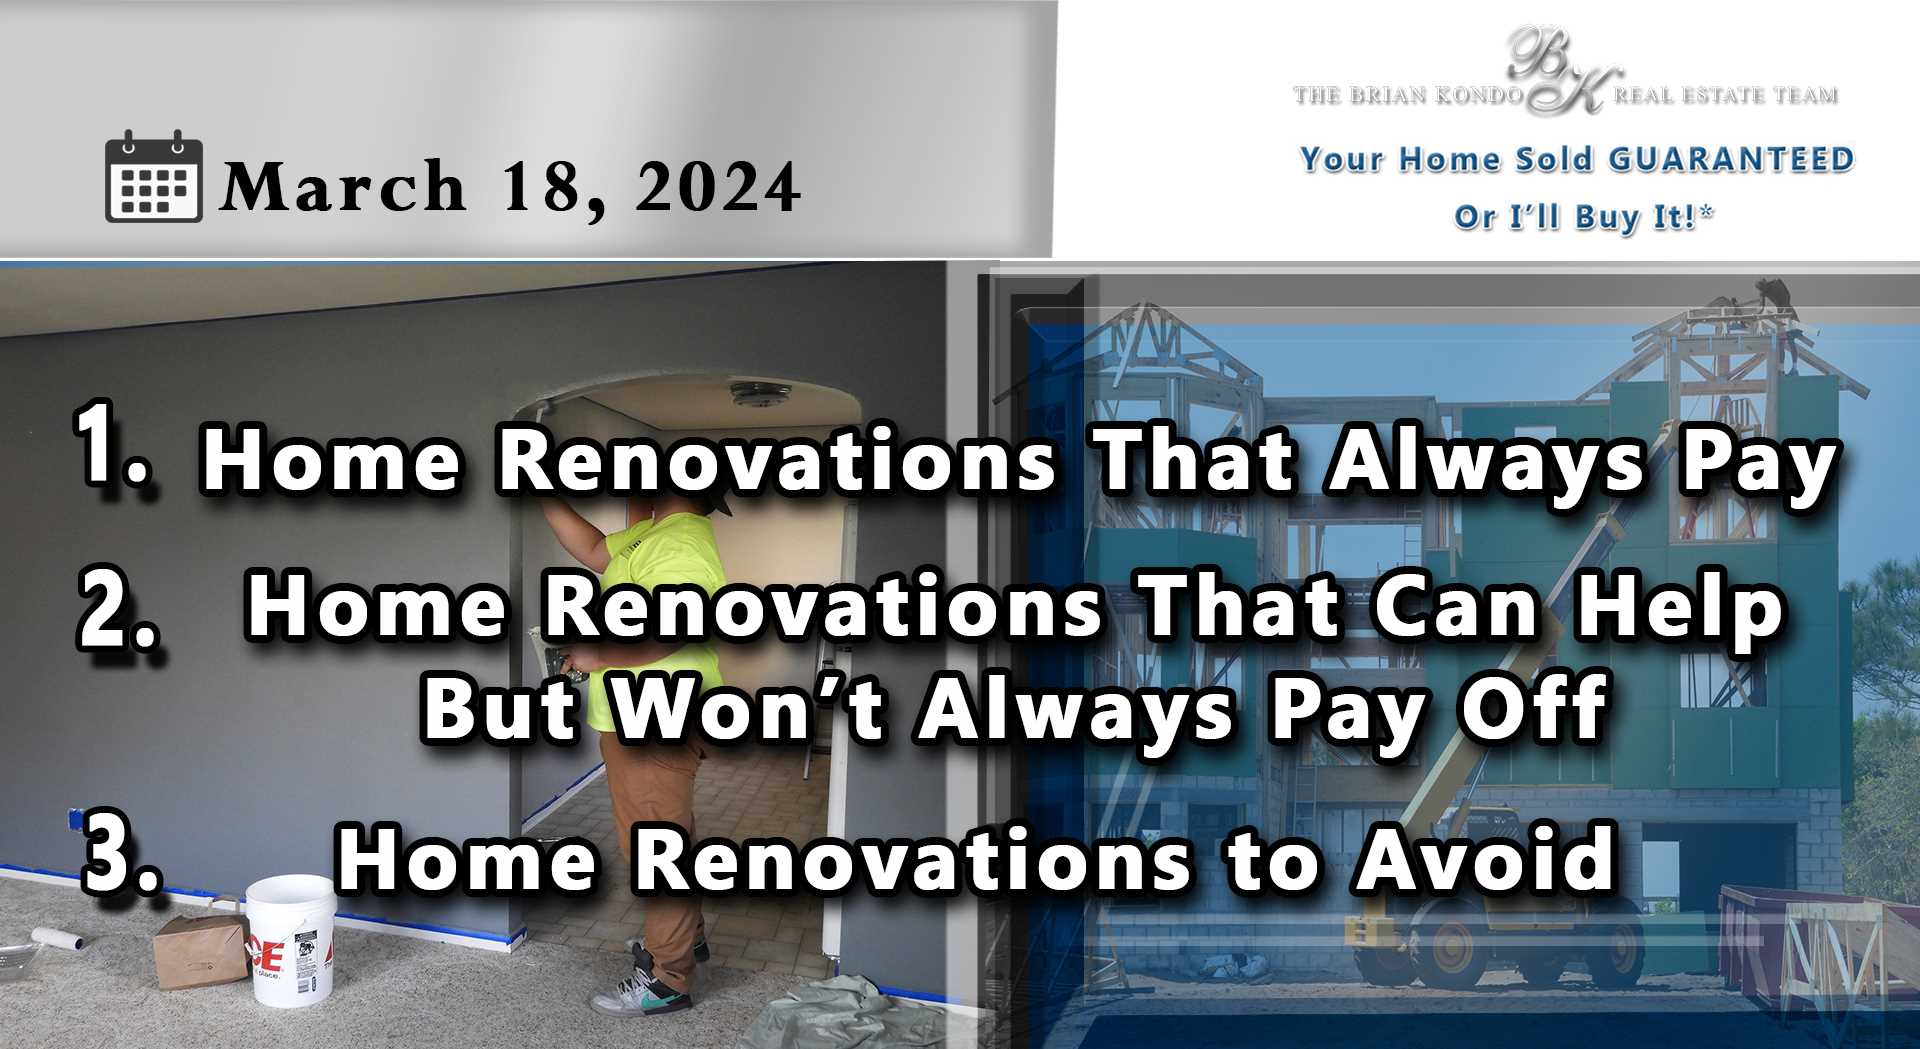 Home Renovations That Always Pay + Home Renovations That Can Help But Won't Always Pay Off + Home Renovations to Avoid